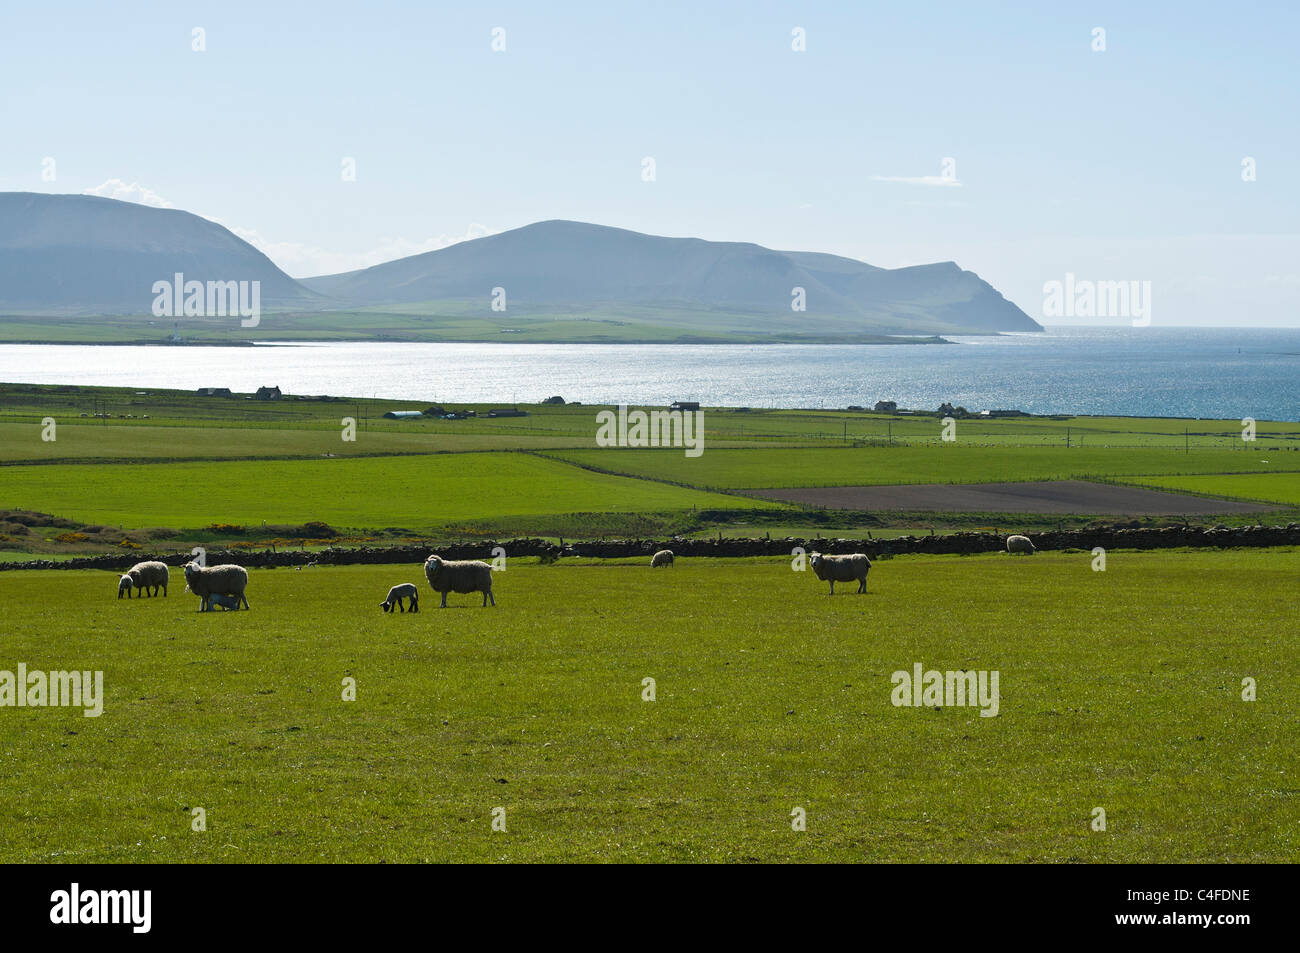 dh Sheep FARMING ORKNEY Scottish lambs and sheep in field Scapa Flow hoy hills scotland lamb farmland fields Stock Photo